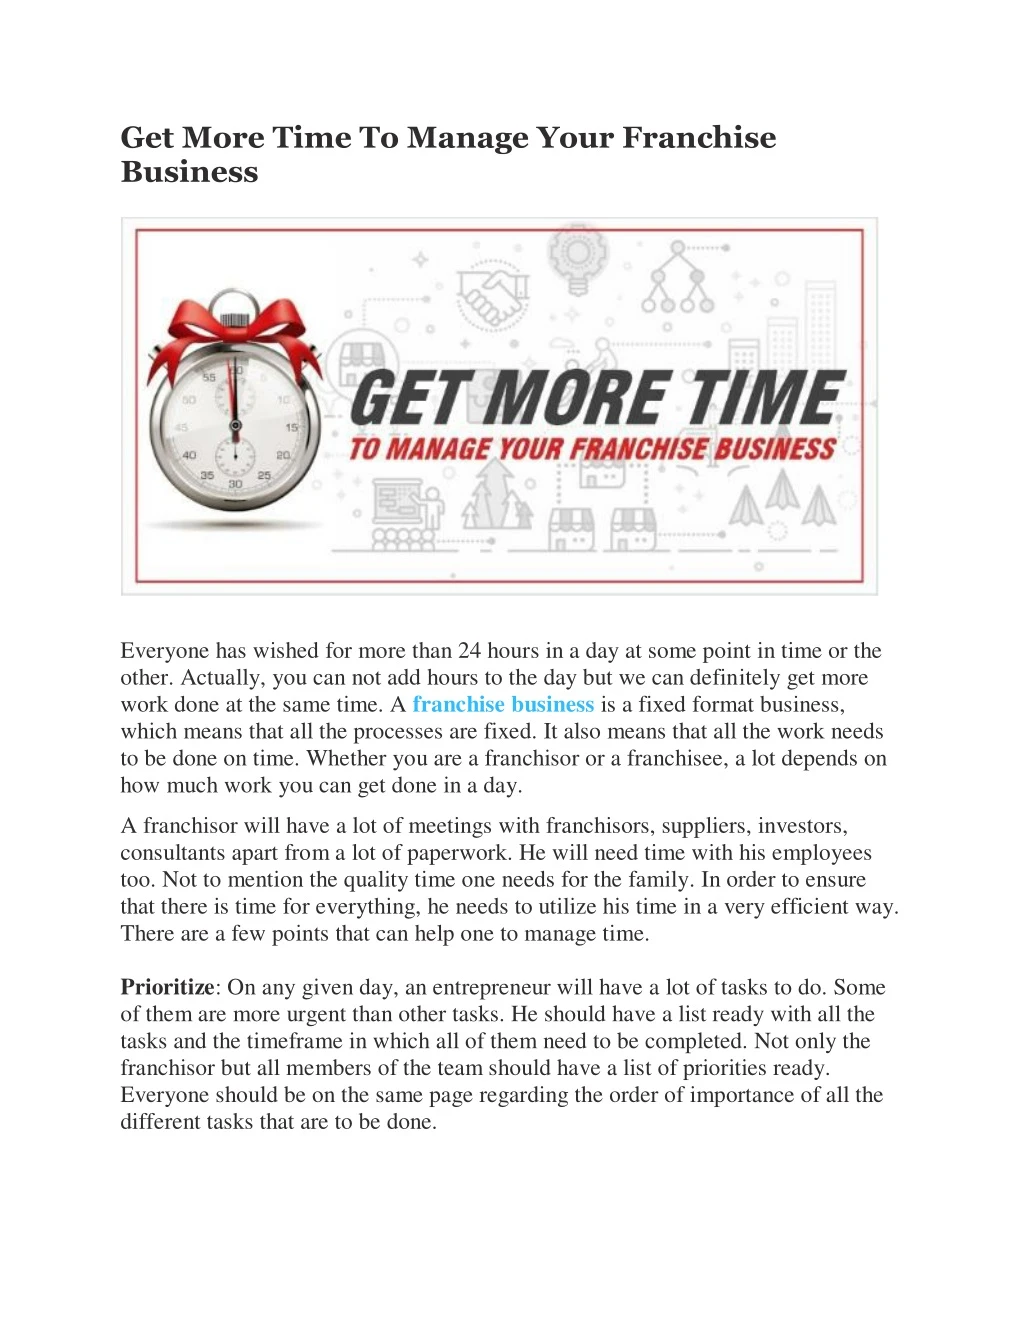 get more time to manage your franchise business